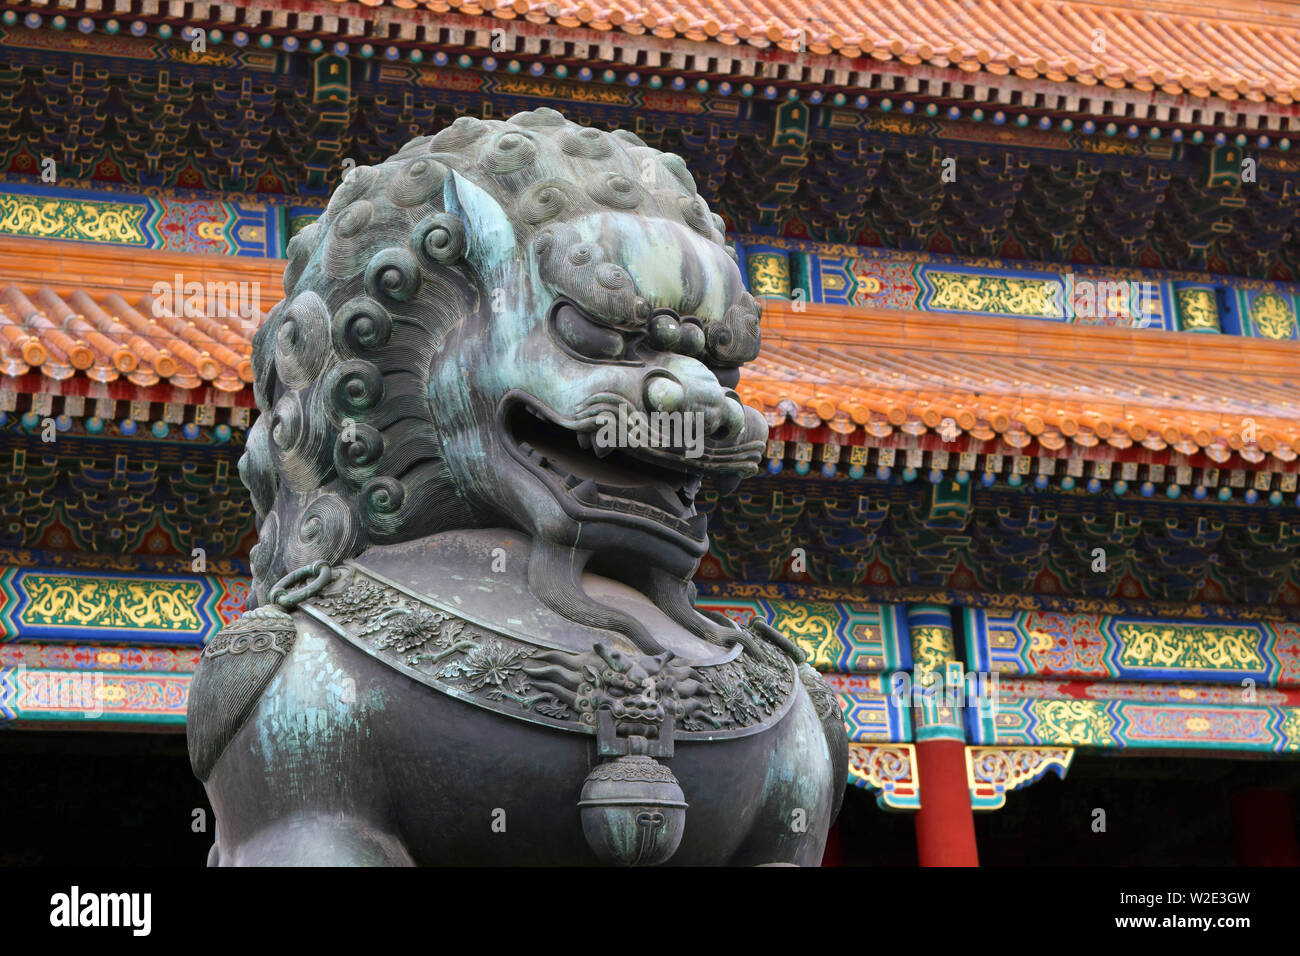 Statue of a bronze lion inside the forbidden city in Beijing, China. An ancient Historical Famous Building. Stock Photo